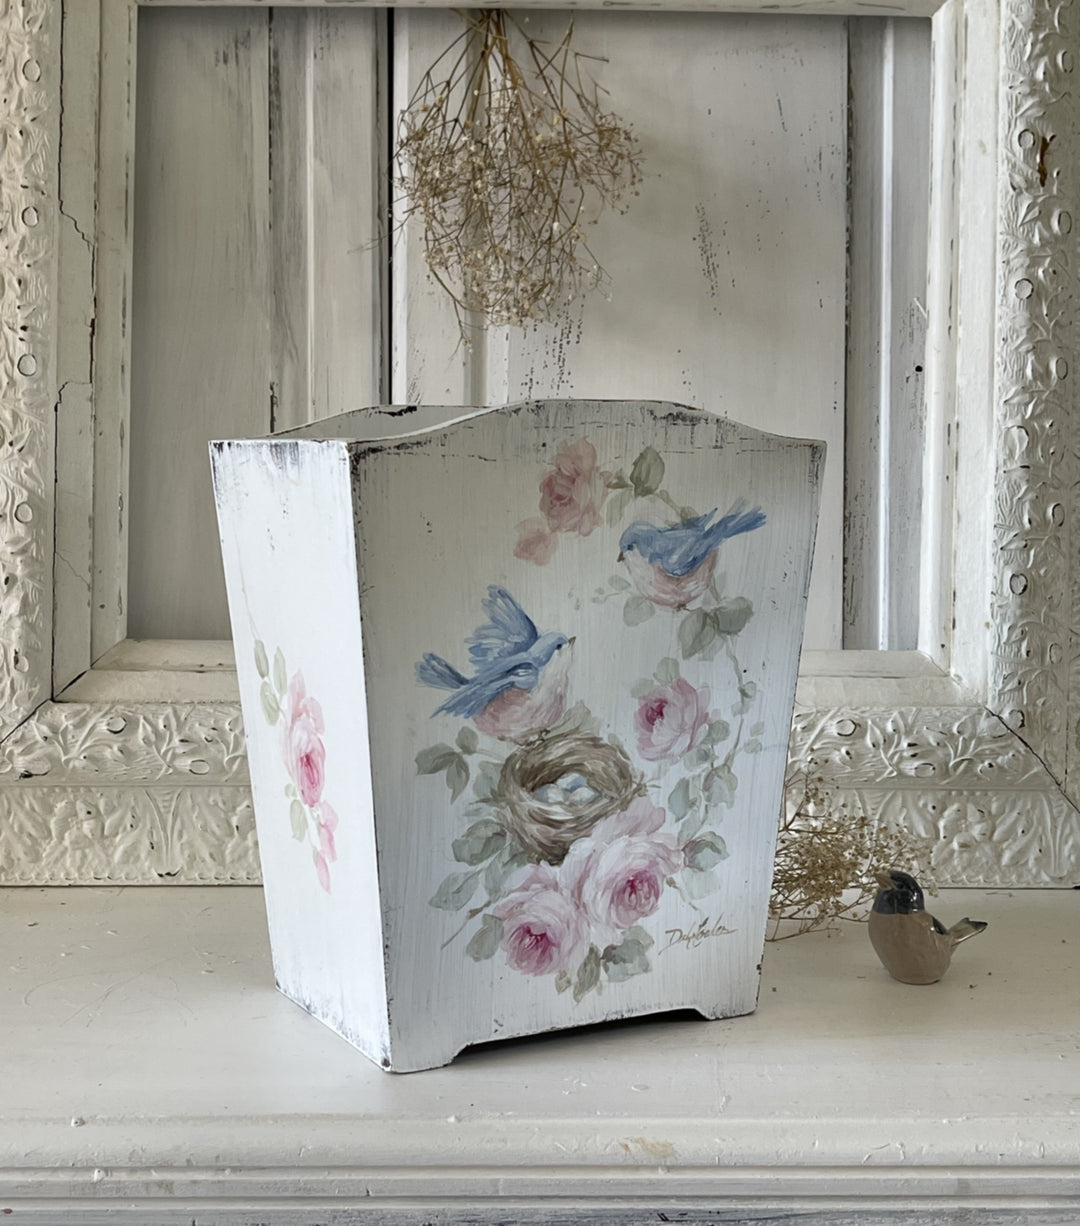 Shabby Chic Vintage Bluebirds Nest and Roses Wood Flower Vase Original by Debi Coules